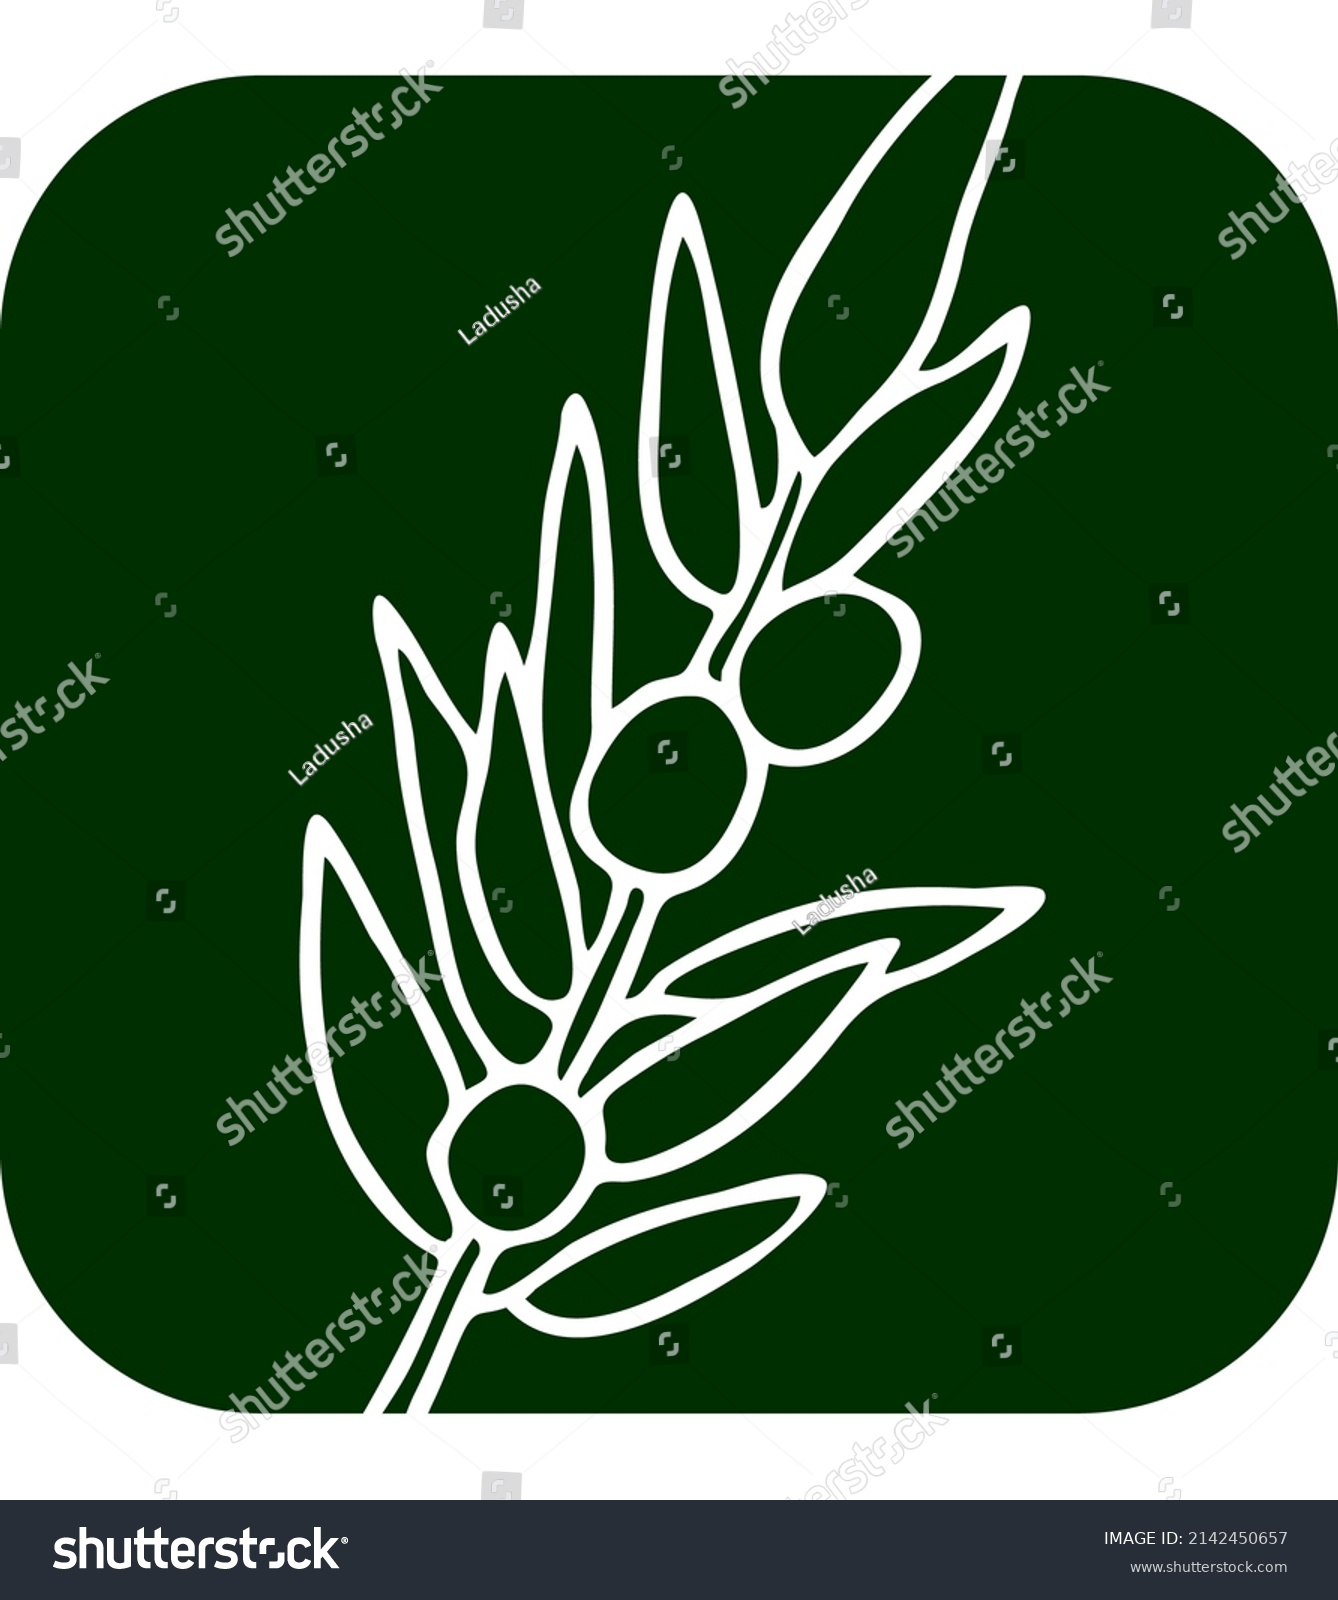 Olive Branch Green Leaves Olives Oil Stock Vector Royalty Free 2142450657 Shutterstock 